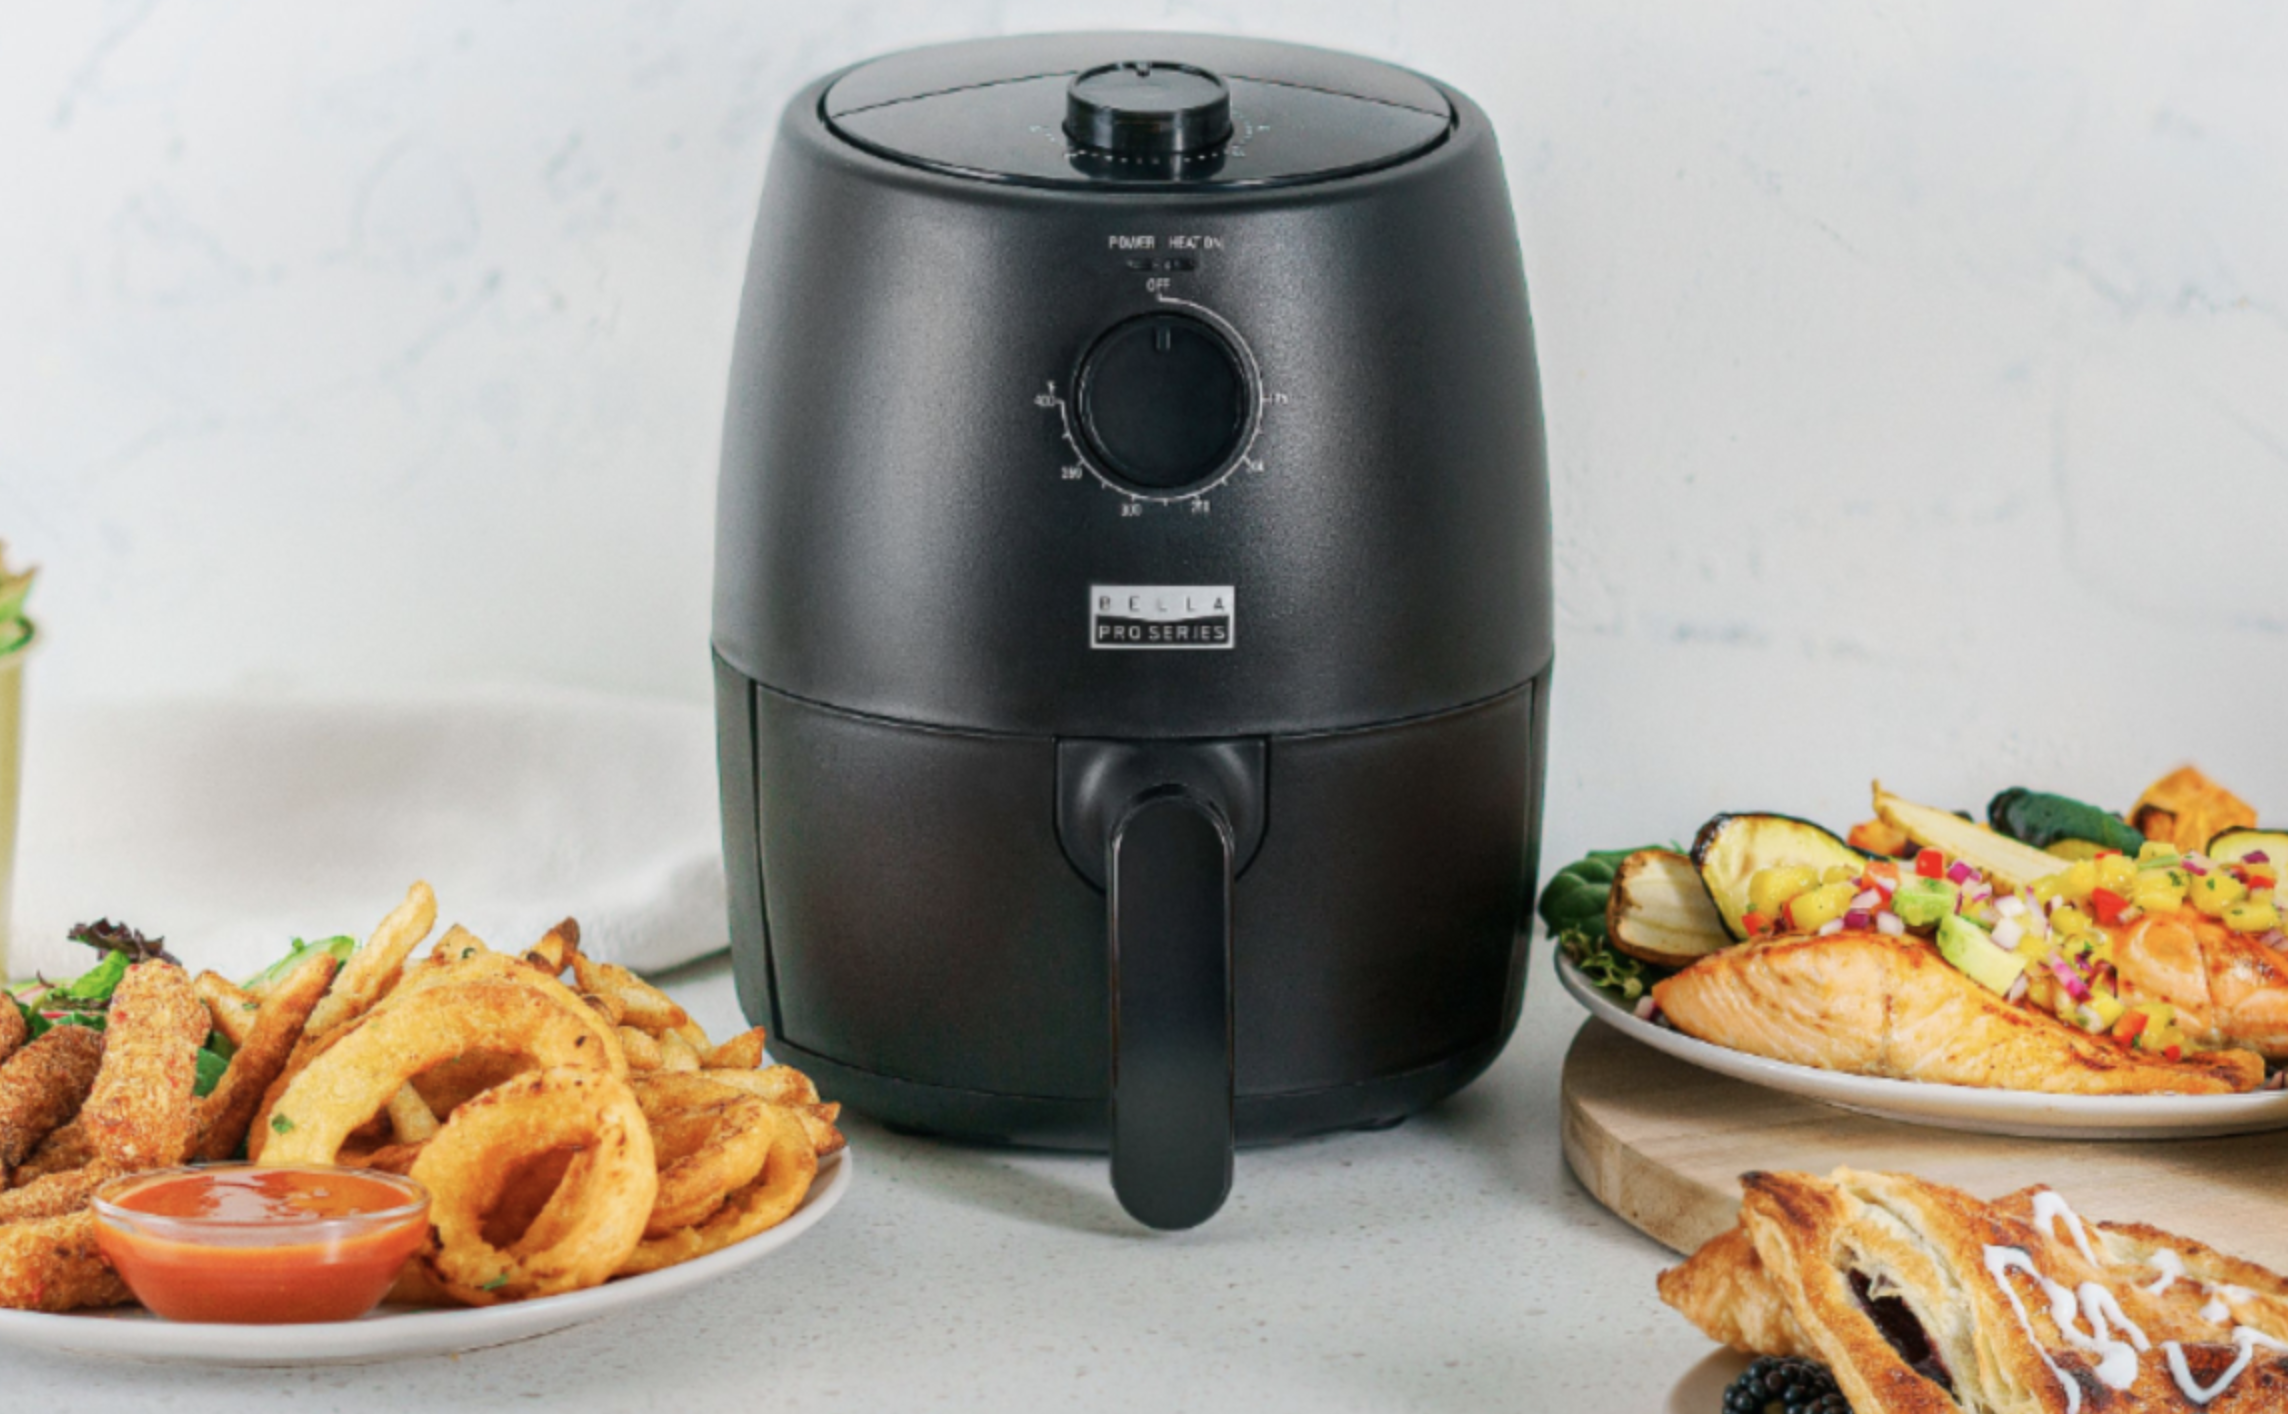 Ends Tonight: Get this Popular Air Fryer for $17 at Best Buy